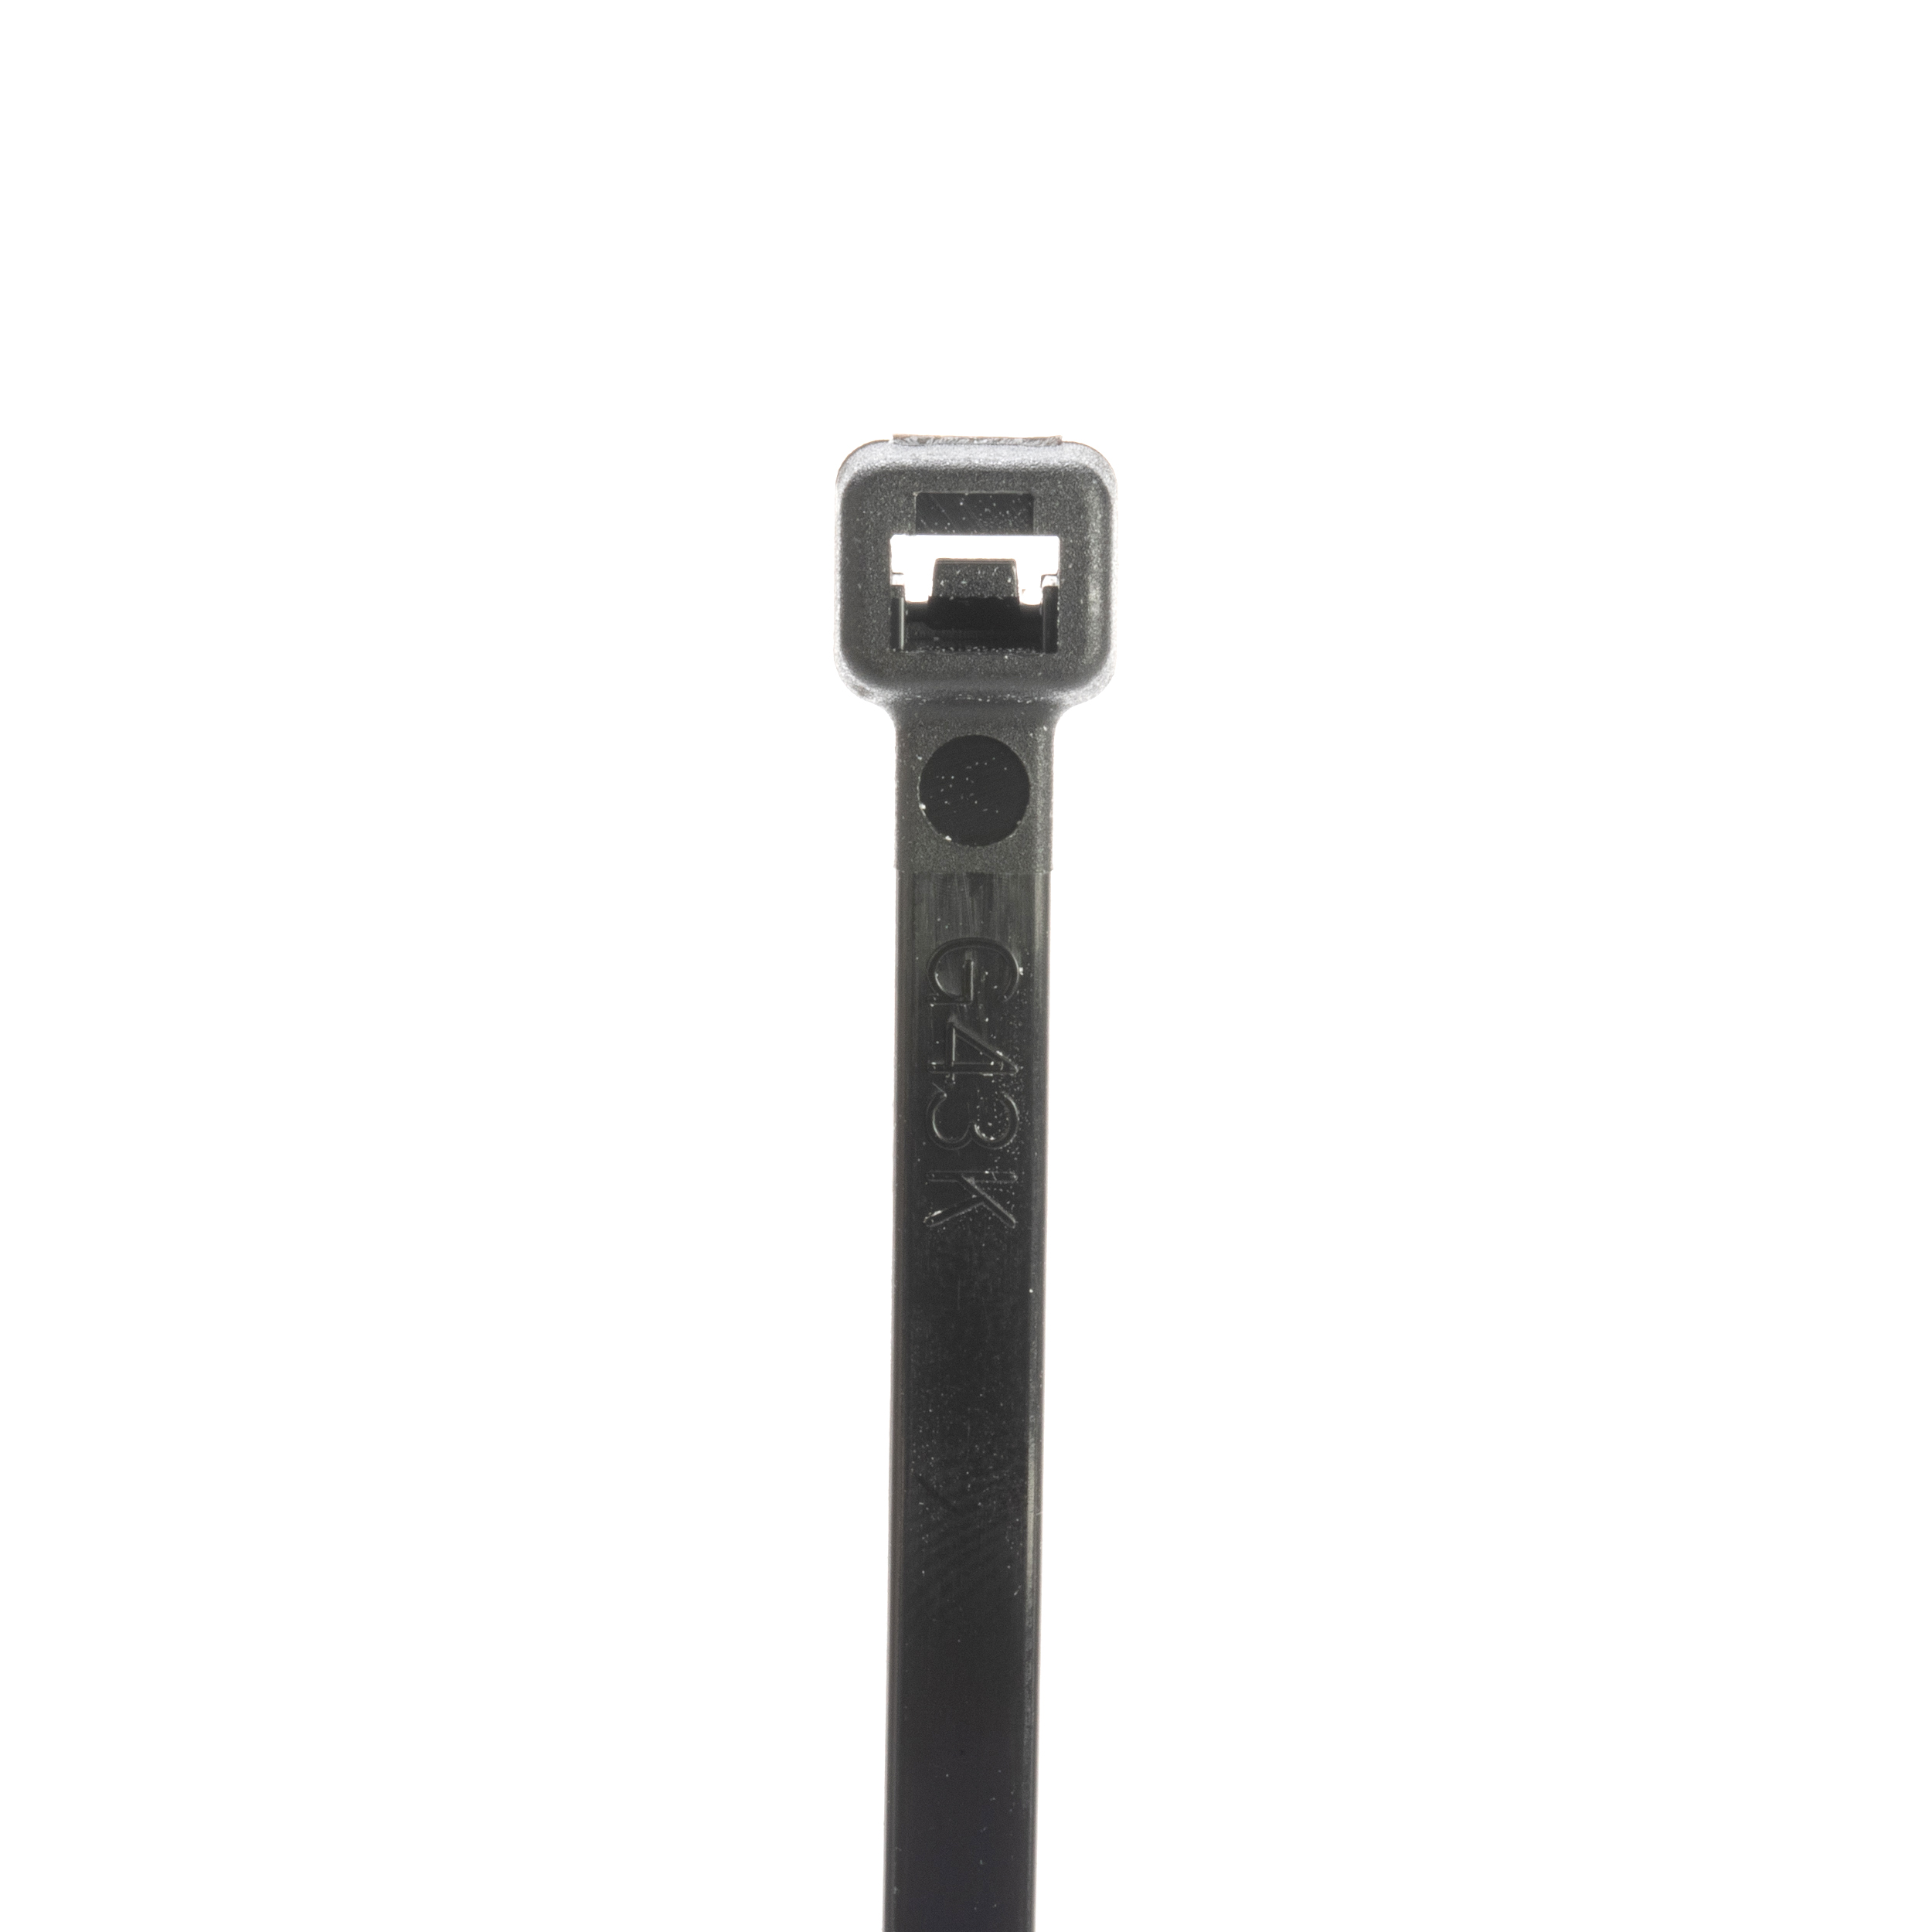 PAN S4-18-M0 3.94" CABLE TIE 18TS BLA CK